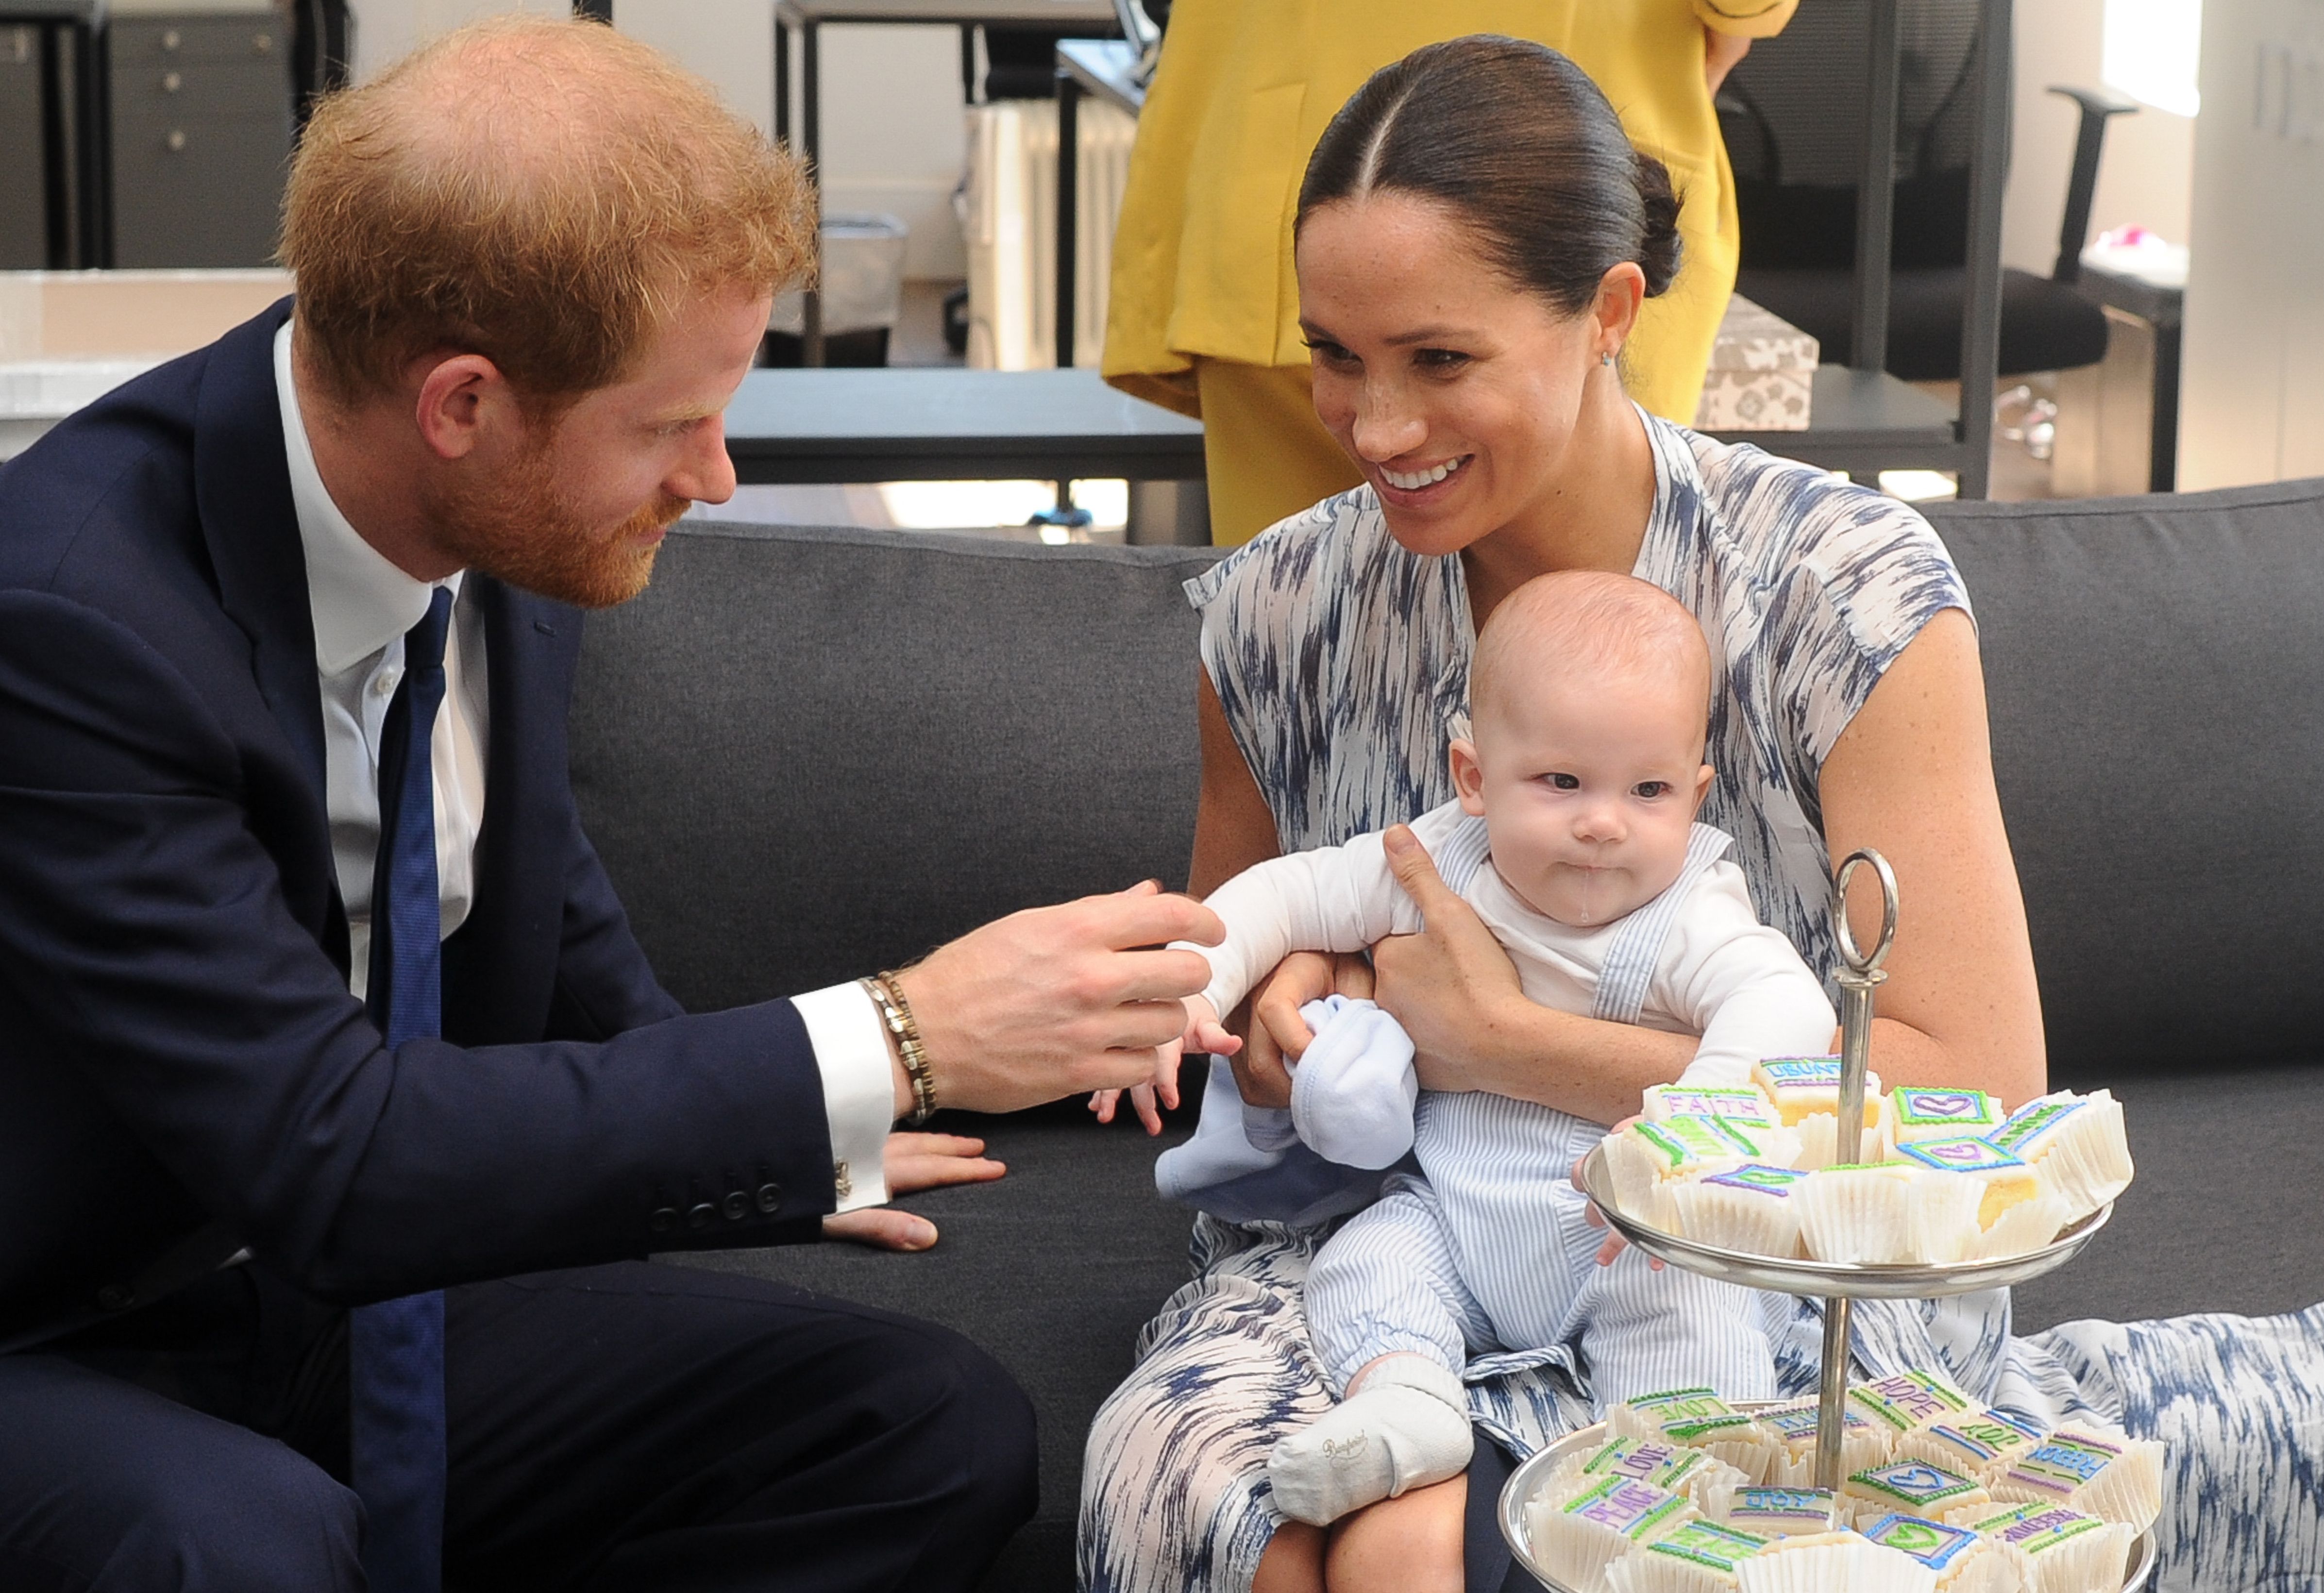 Britain's Duke and Duchess of Sussex, Prince Harry and his wife Meghan hold their baby son Archie as they meet with Archbishop Desmond Tutu (unseen) at the Tutu Legacy Foundation  in Cape Town on September 25, 2019. - The British royal couple are on a 10-day tour of southern Africa -- their first official visit as a family since their son Archie was born in May. (Photo by HENK KRUGER / POOL / AFP)        (Photo credit should read HENK KRUGER/AFP/Getty Images)